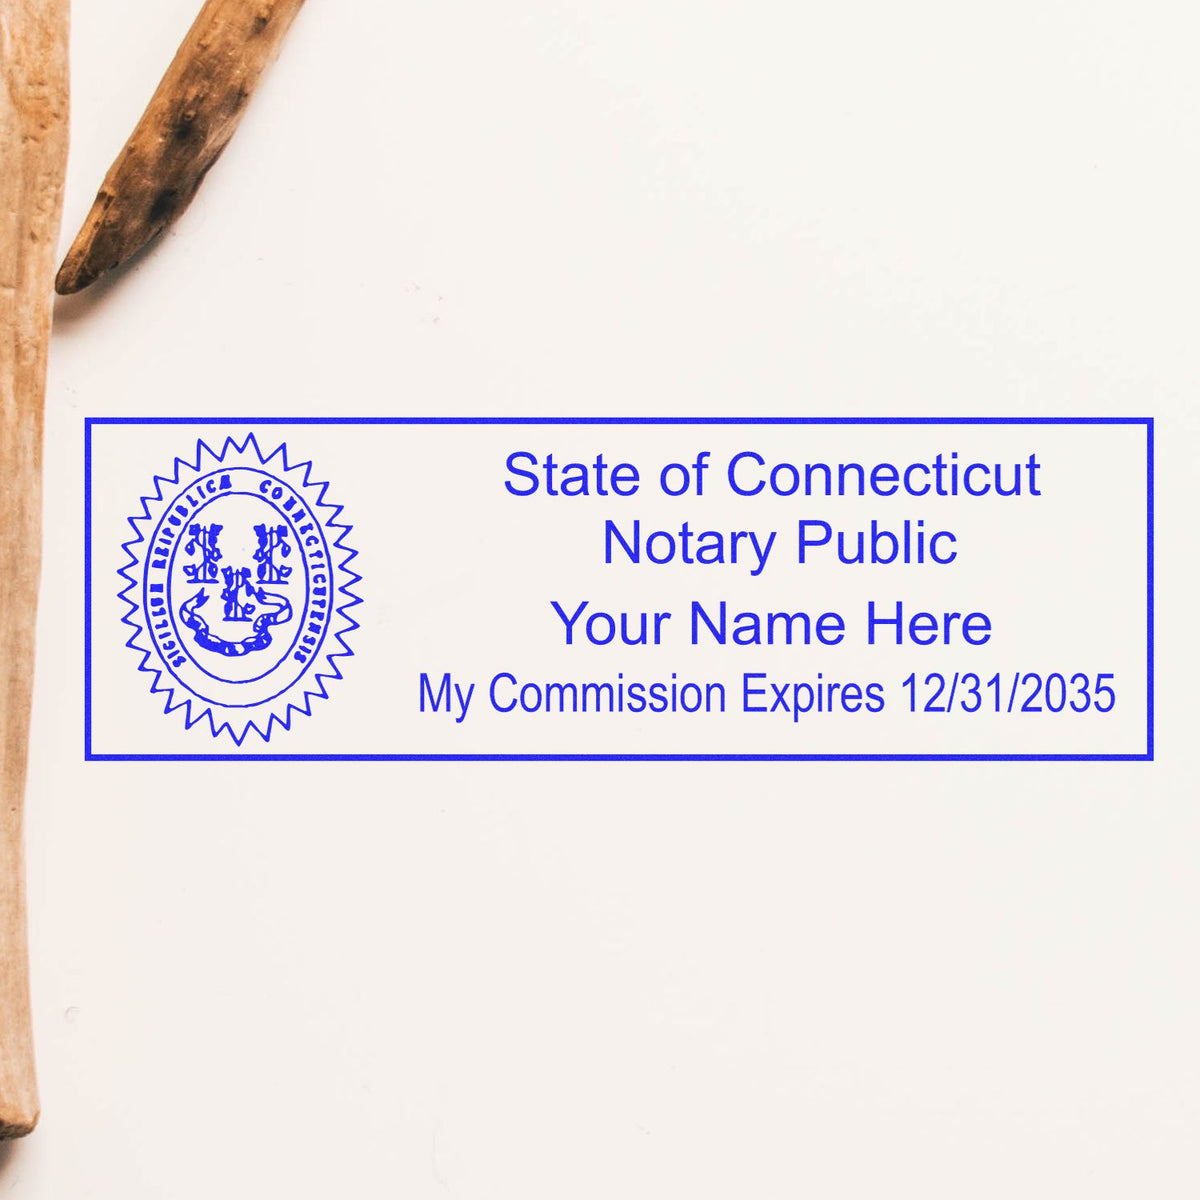 An alternative view of the Super Slim Connecticut Notary Public Stamp stamped on a sheet of paper showing the image in use